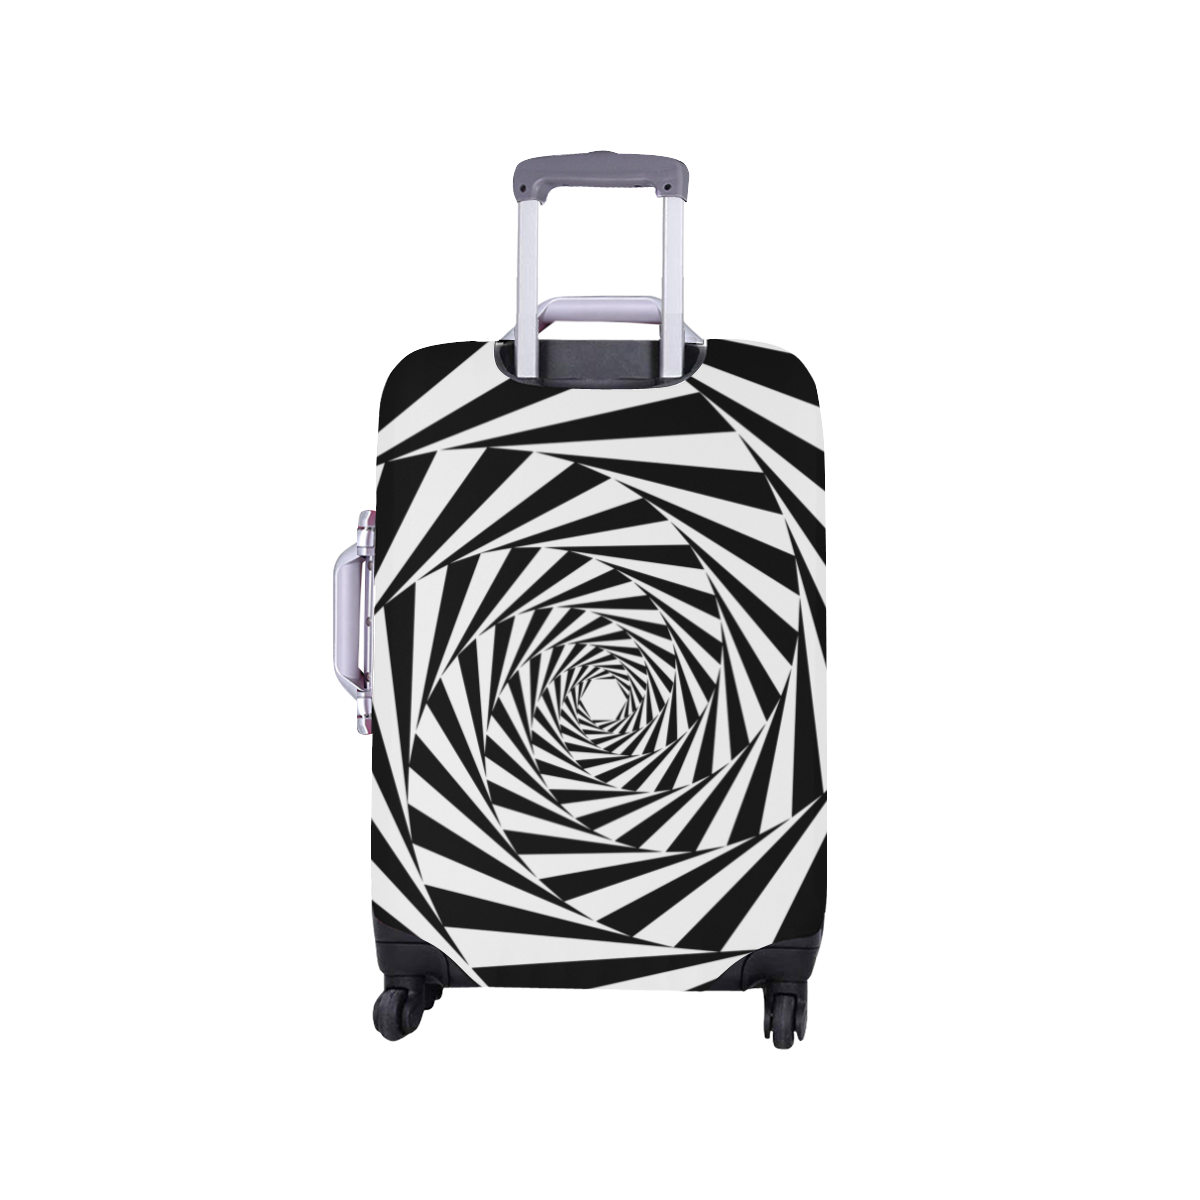 Spiral Luggage Cover/Small 18"-21"